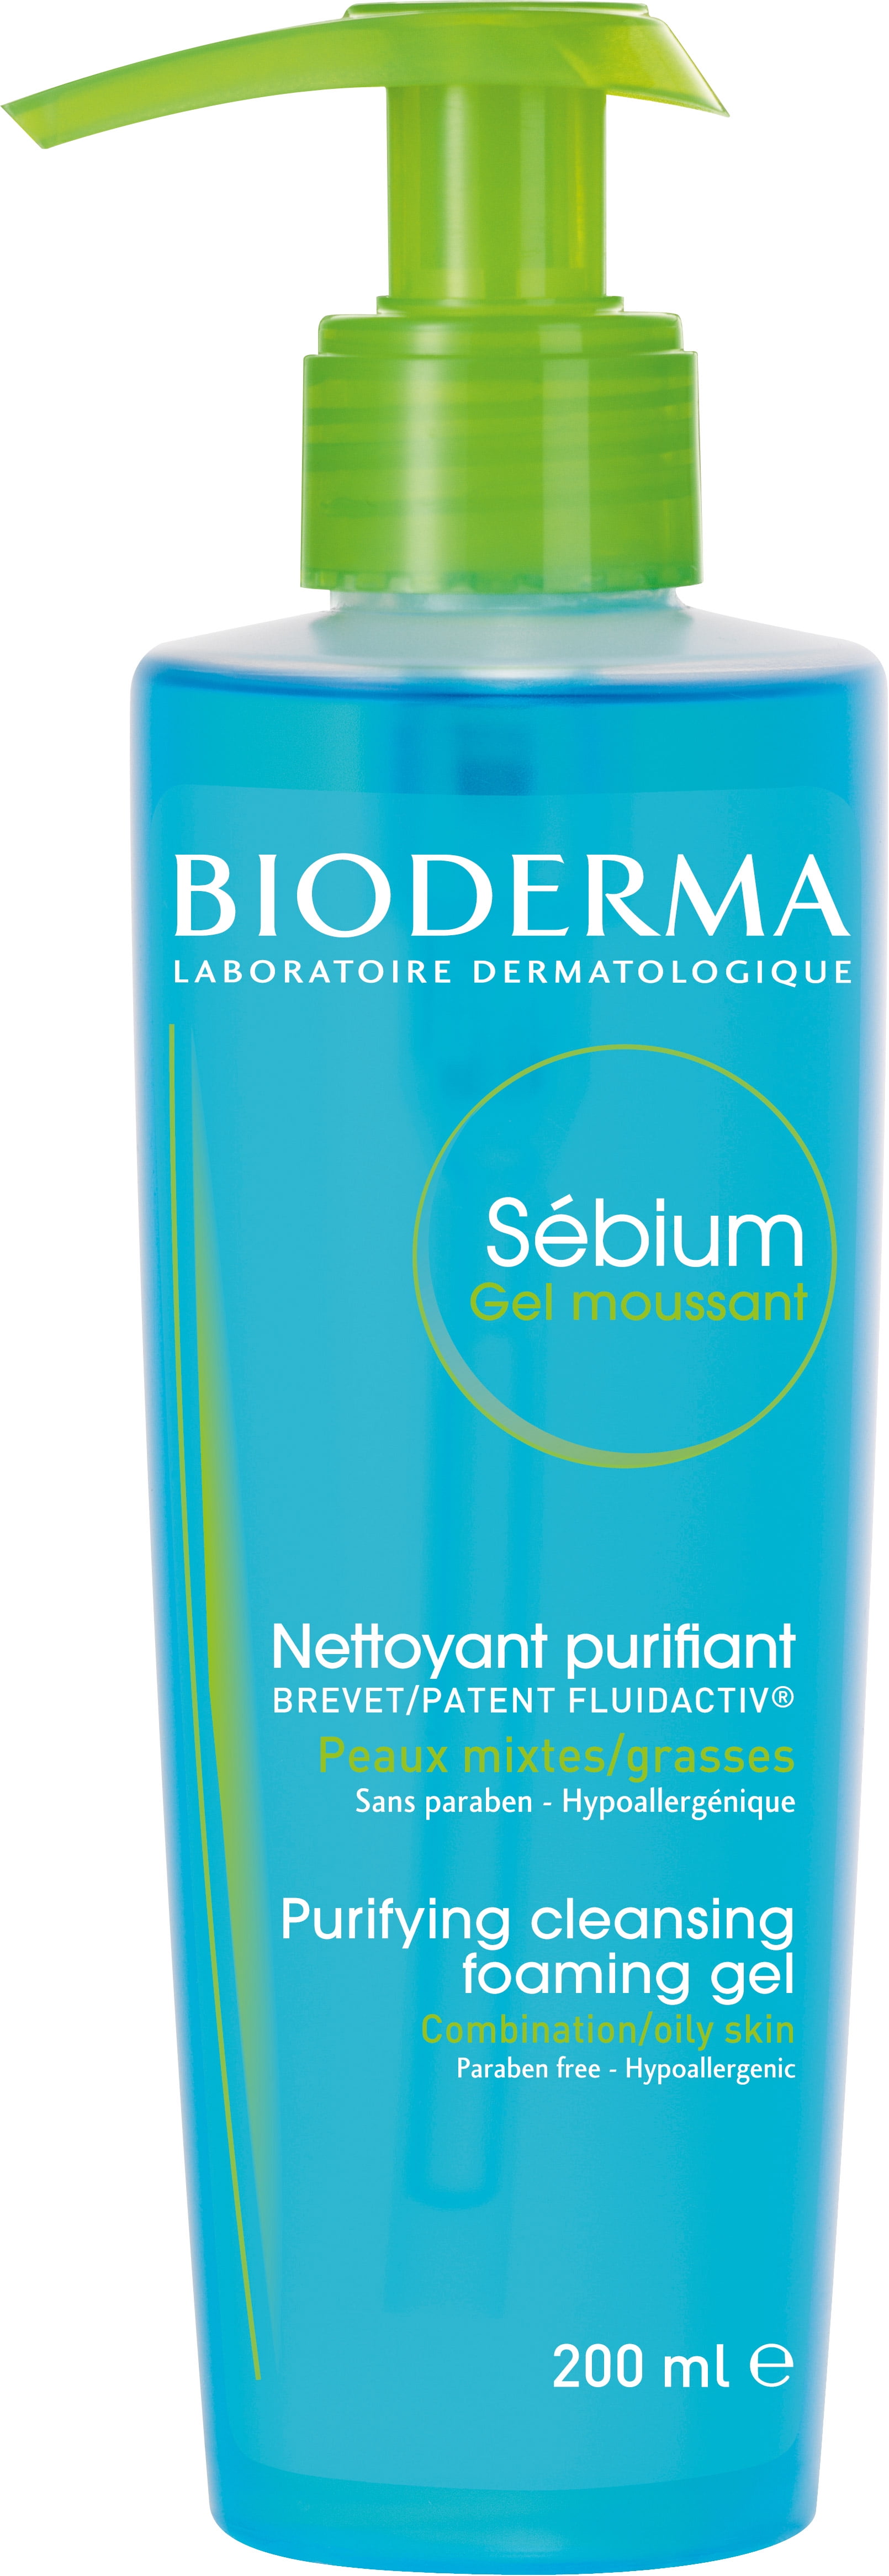 Bioderma - Sébium - Foaming Gel Pump - Cleansing and Make-Up Removing -  Skin Purifying - for Combination to Oily Skin